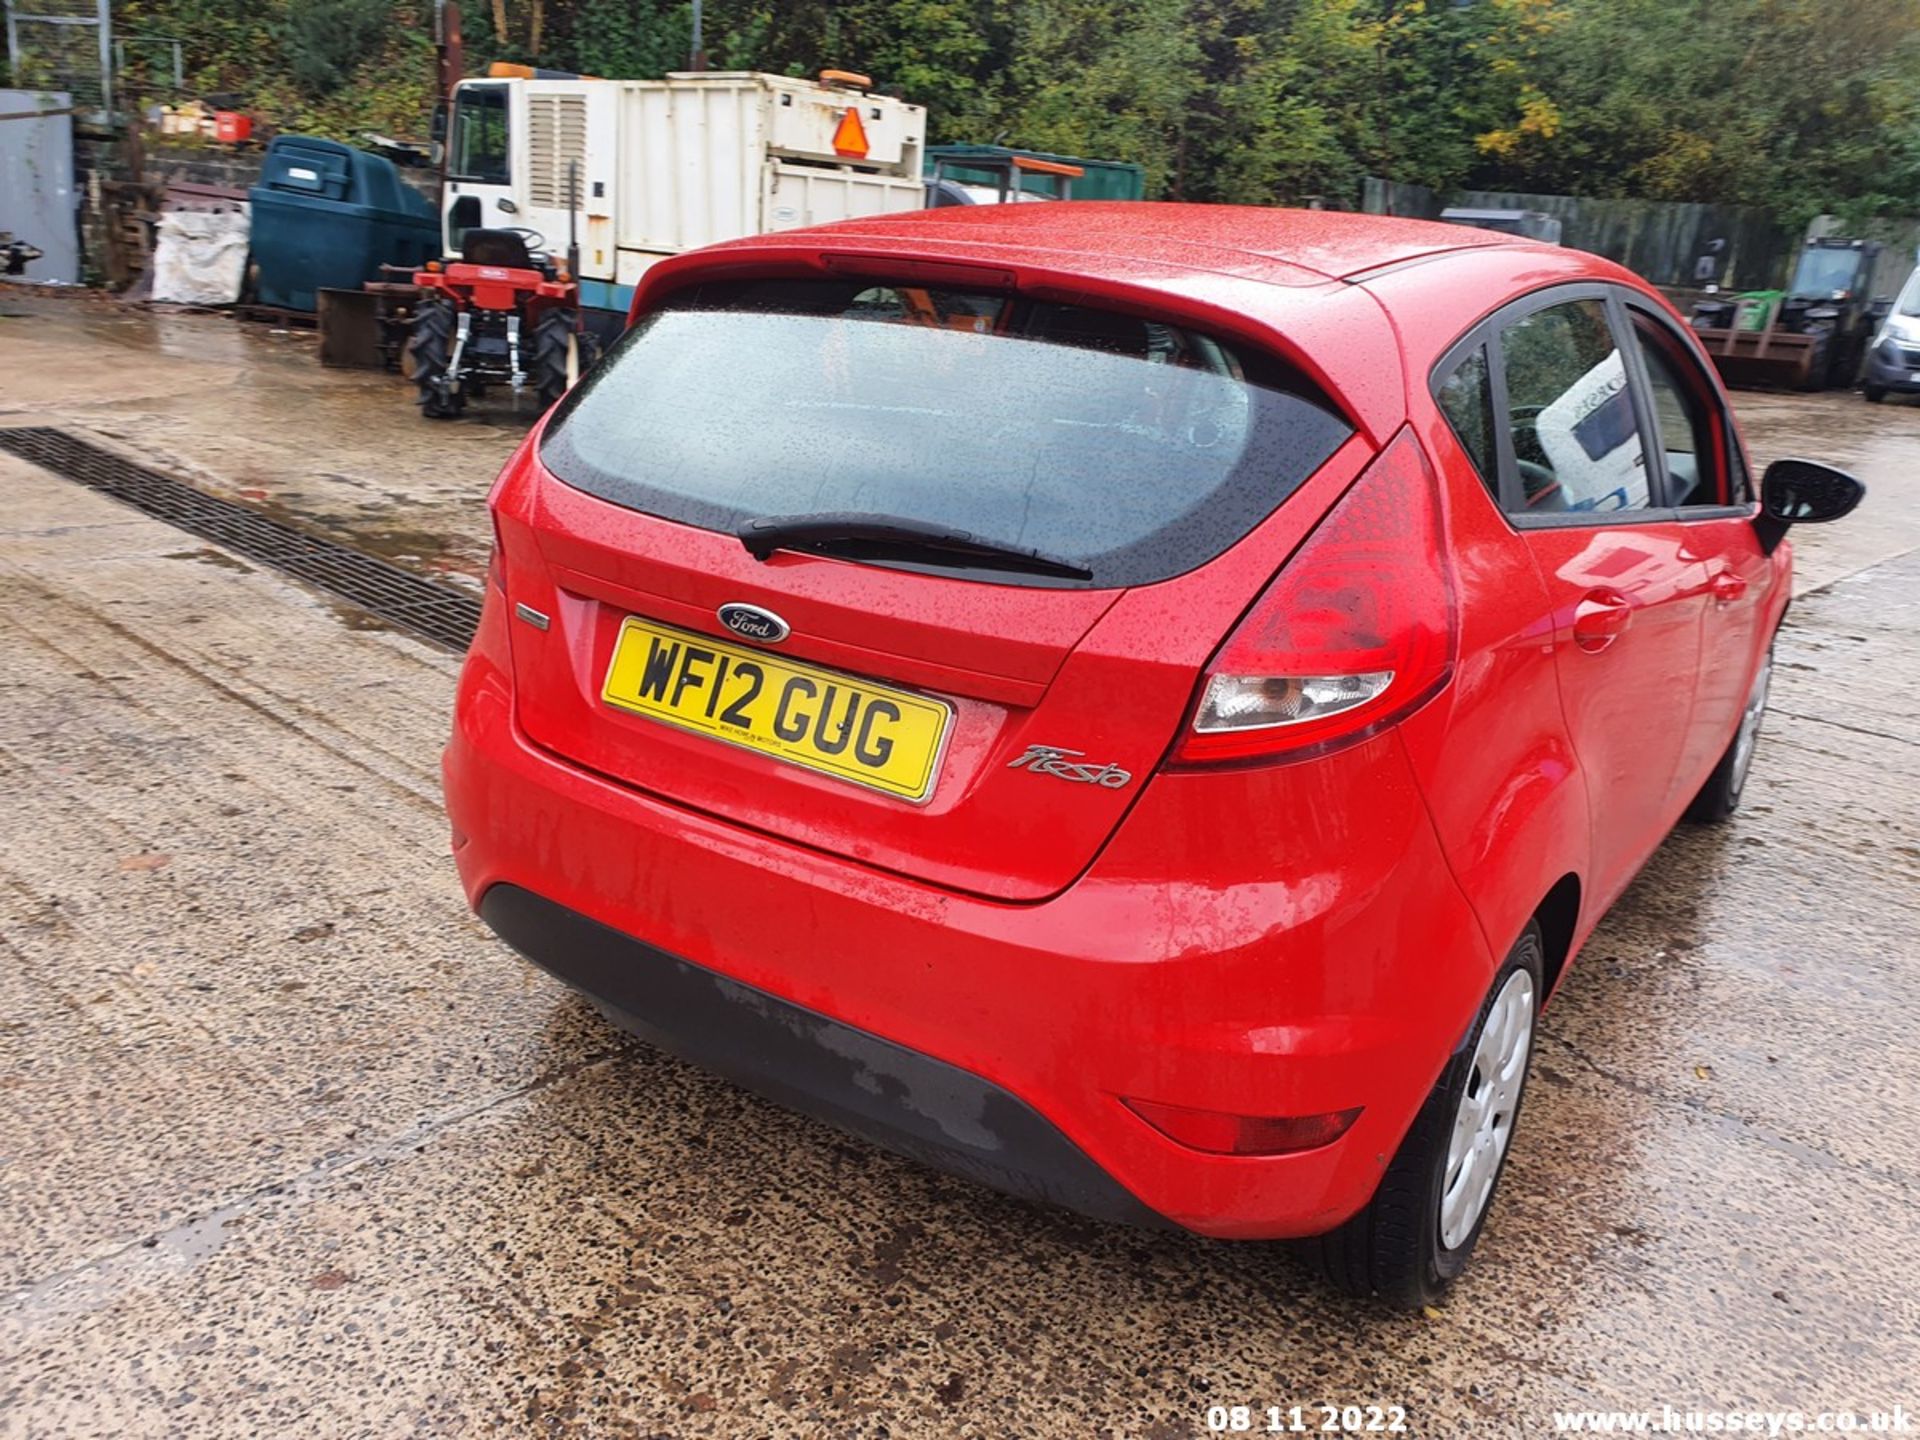 12/12 FORD FIESTA EDGE ECONETIC II T - 1560cc 5dr Hatchback (Red, 173k) - Image 23 of 59